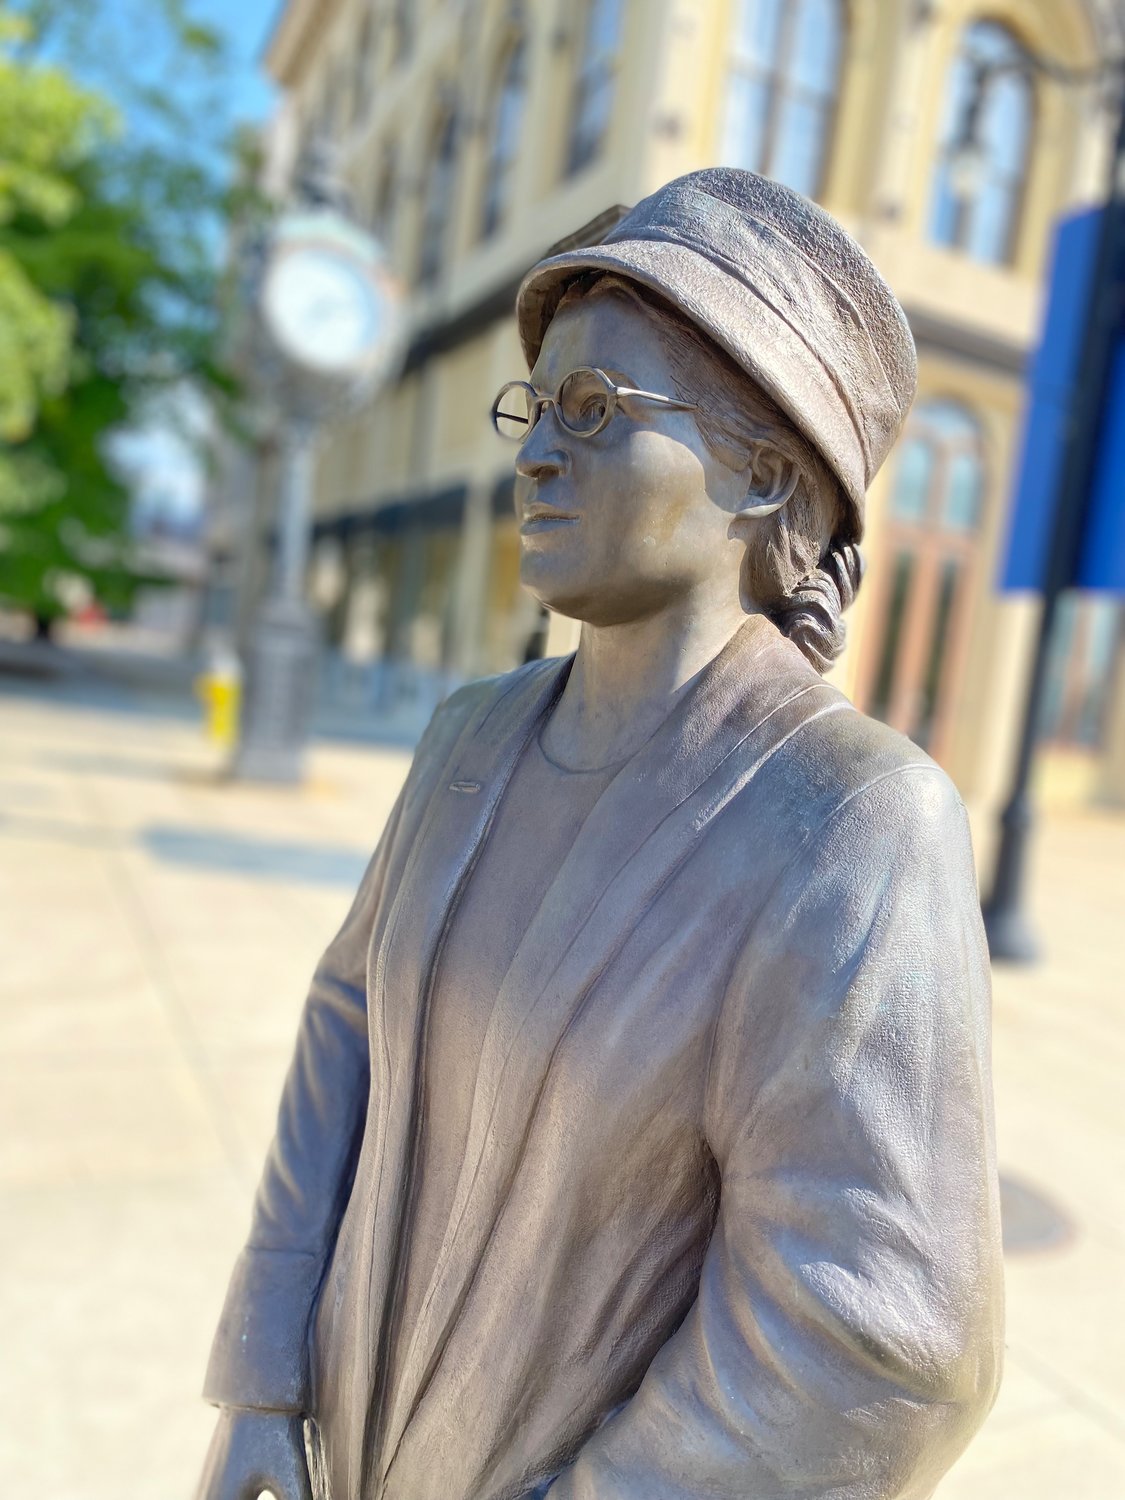 A life-sized statue of Rosa Parks in downtown Montgomery, located near the site where thousands of slaves were auctioned. Parks worked as a seamstress at a nearby business when, on Dec. 1, 1955, she chose to be arrested — rather than give up her seat on a city bus — for violating (legally, as it turned out) local segregation laws.